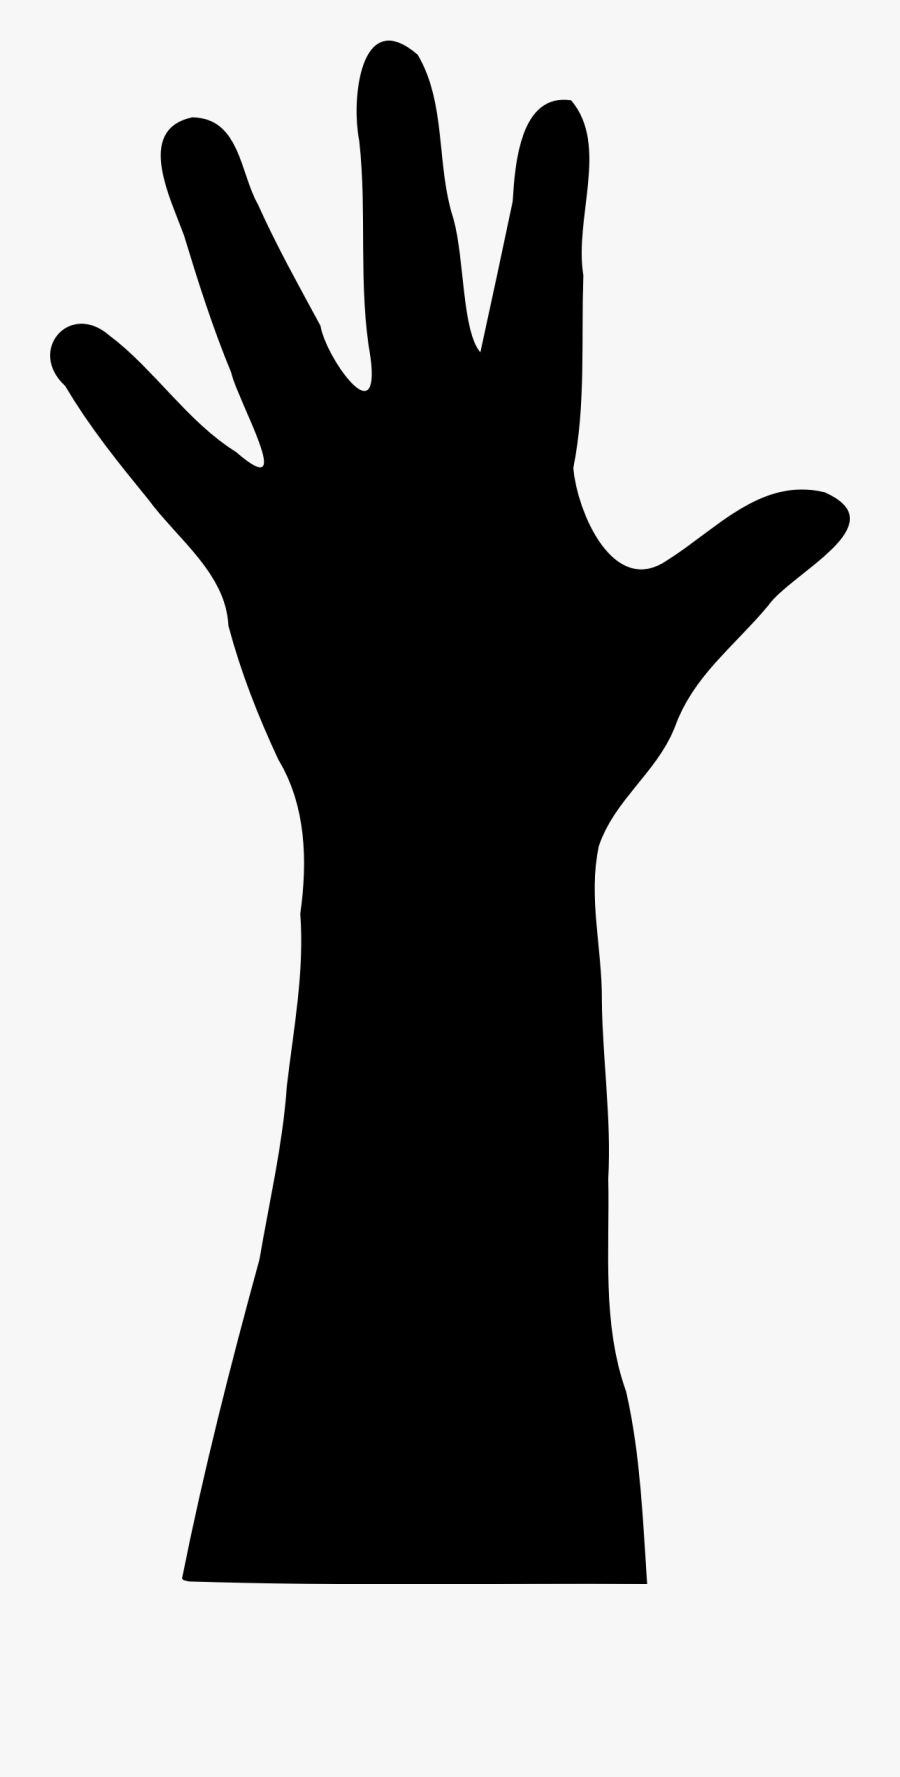 Free Raised Hand In Silhouette - Silhouette Hand Reaching Out, Transparent Clipart